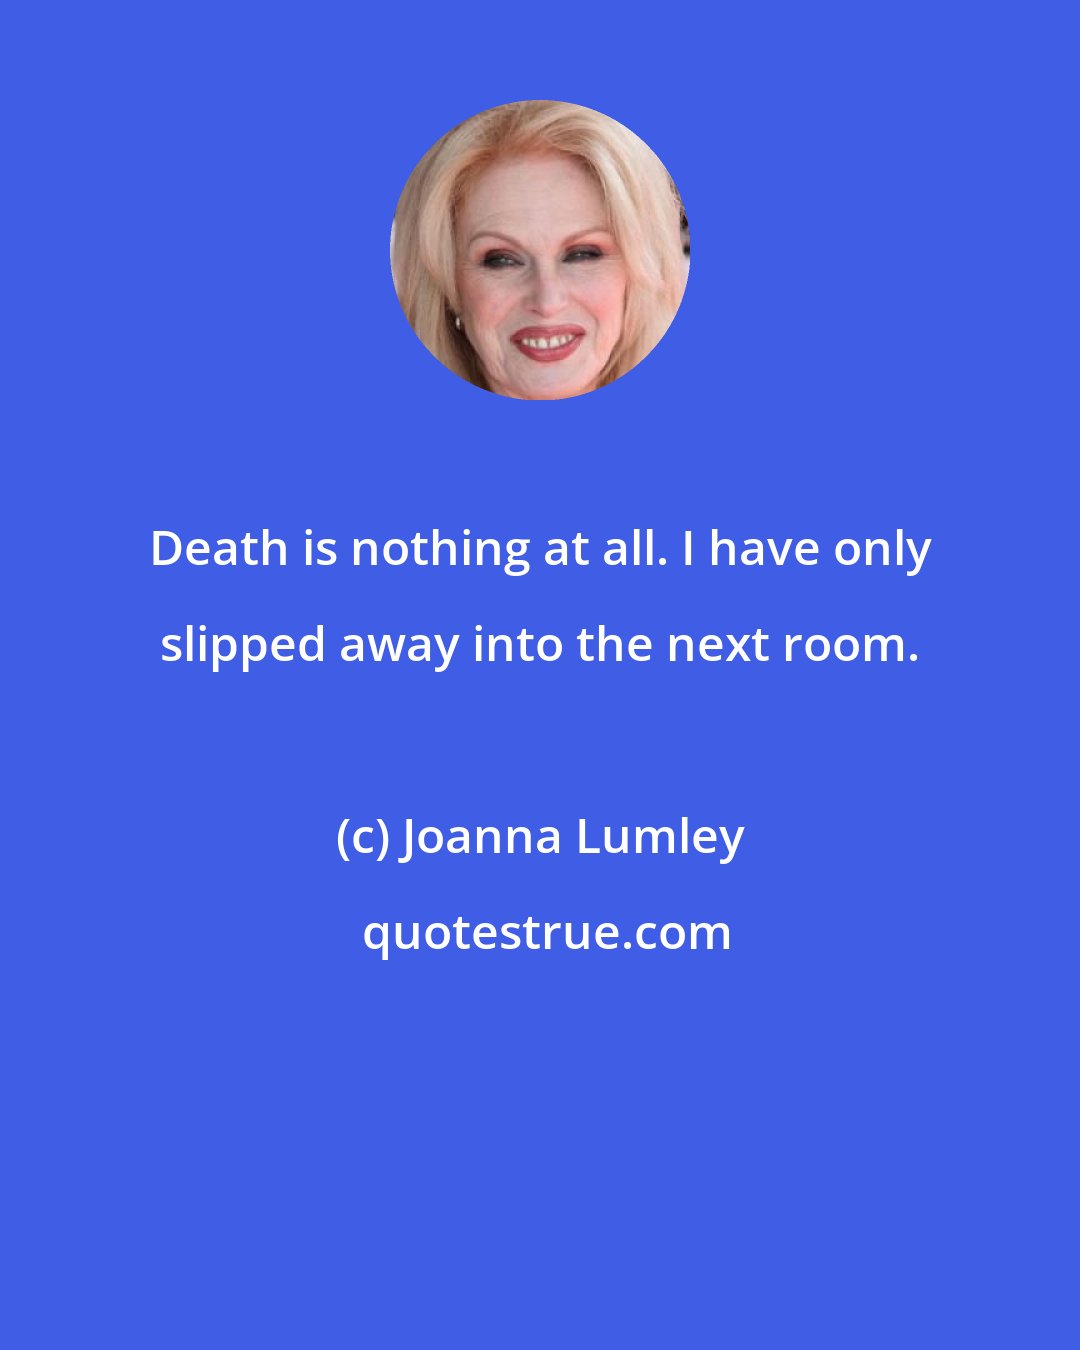 Joanna Lumley: Death is nothing at all. I have only slipped away into the next room.